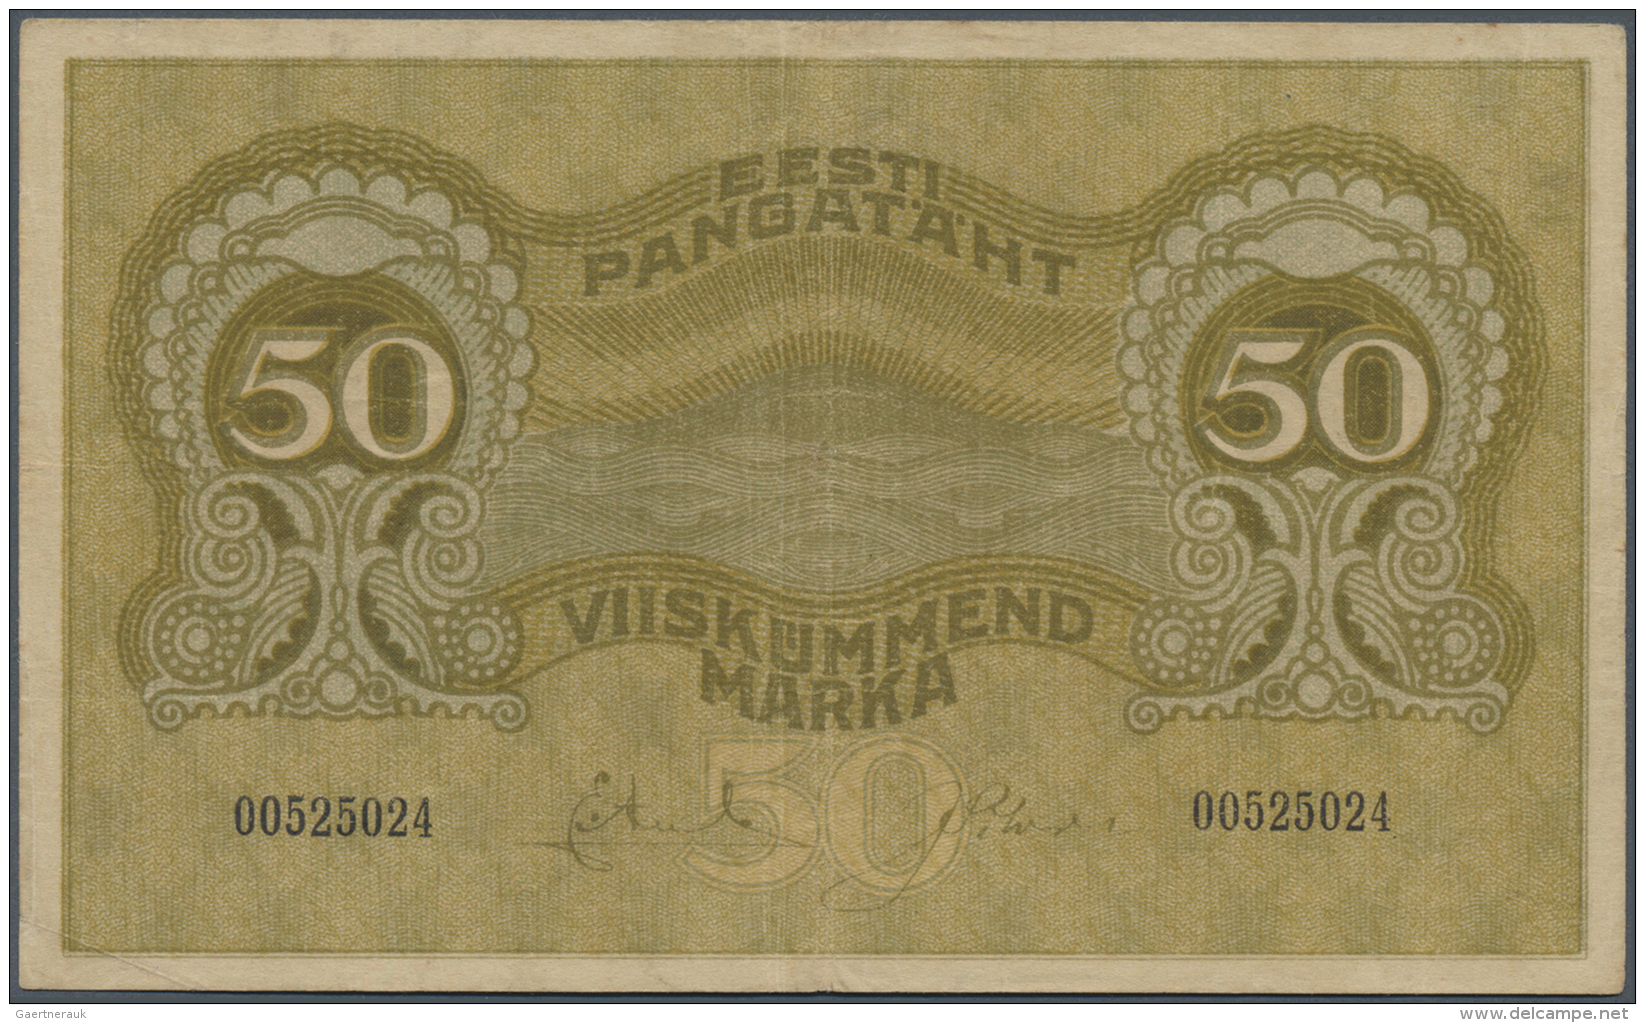 Estonia / Estland: 50 Marka 1919 P. 55, Used With Center Fold And Border Dints, No Holes Or Tears, Still Strongness In P - Estonia